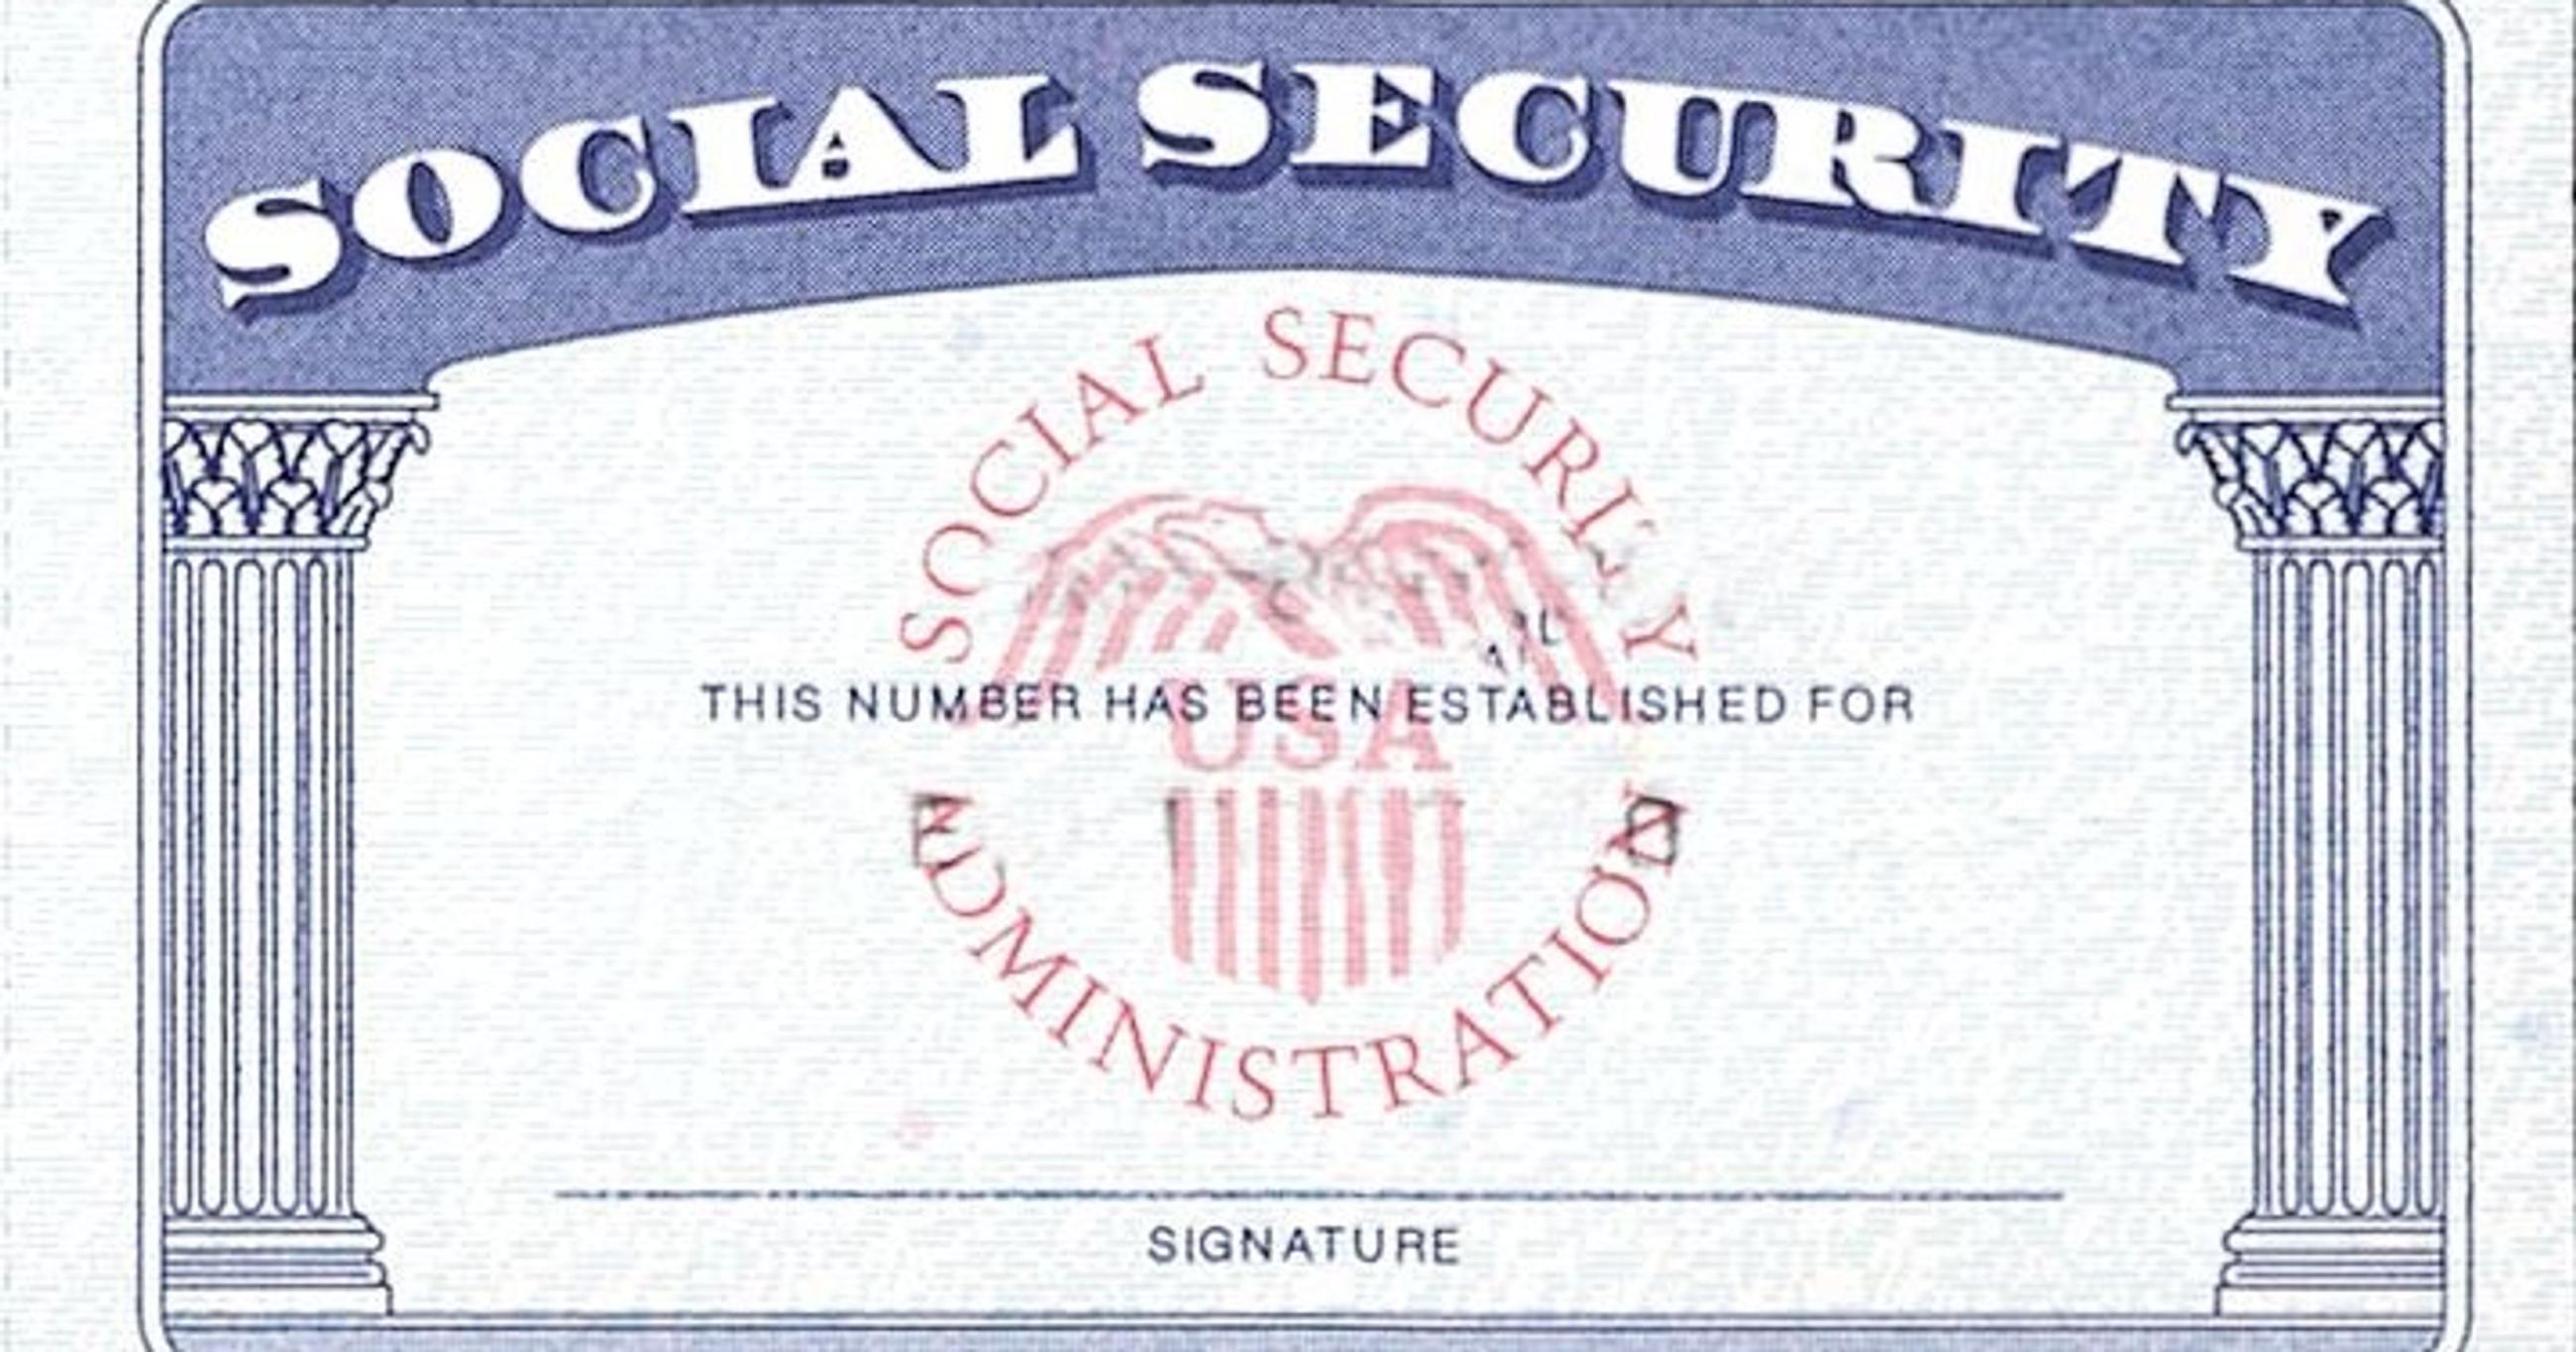 2018-social-security-inflation-adjustments-2-0-if-receive-1-2-if